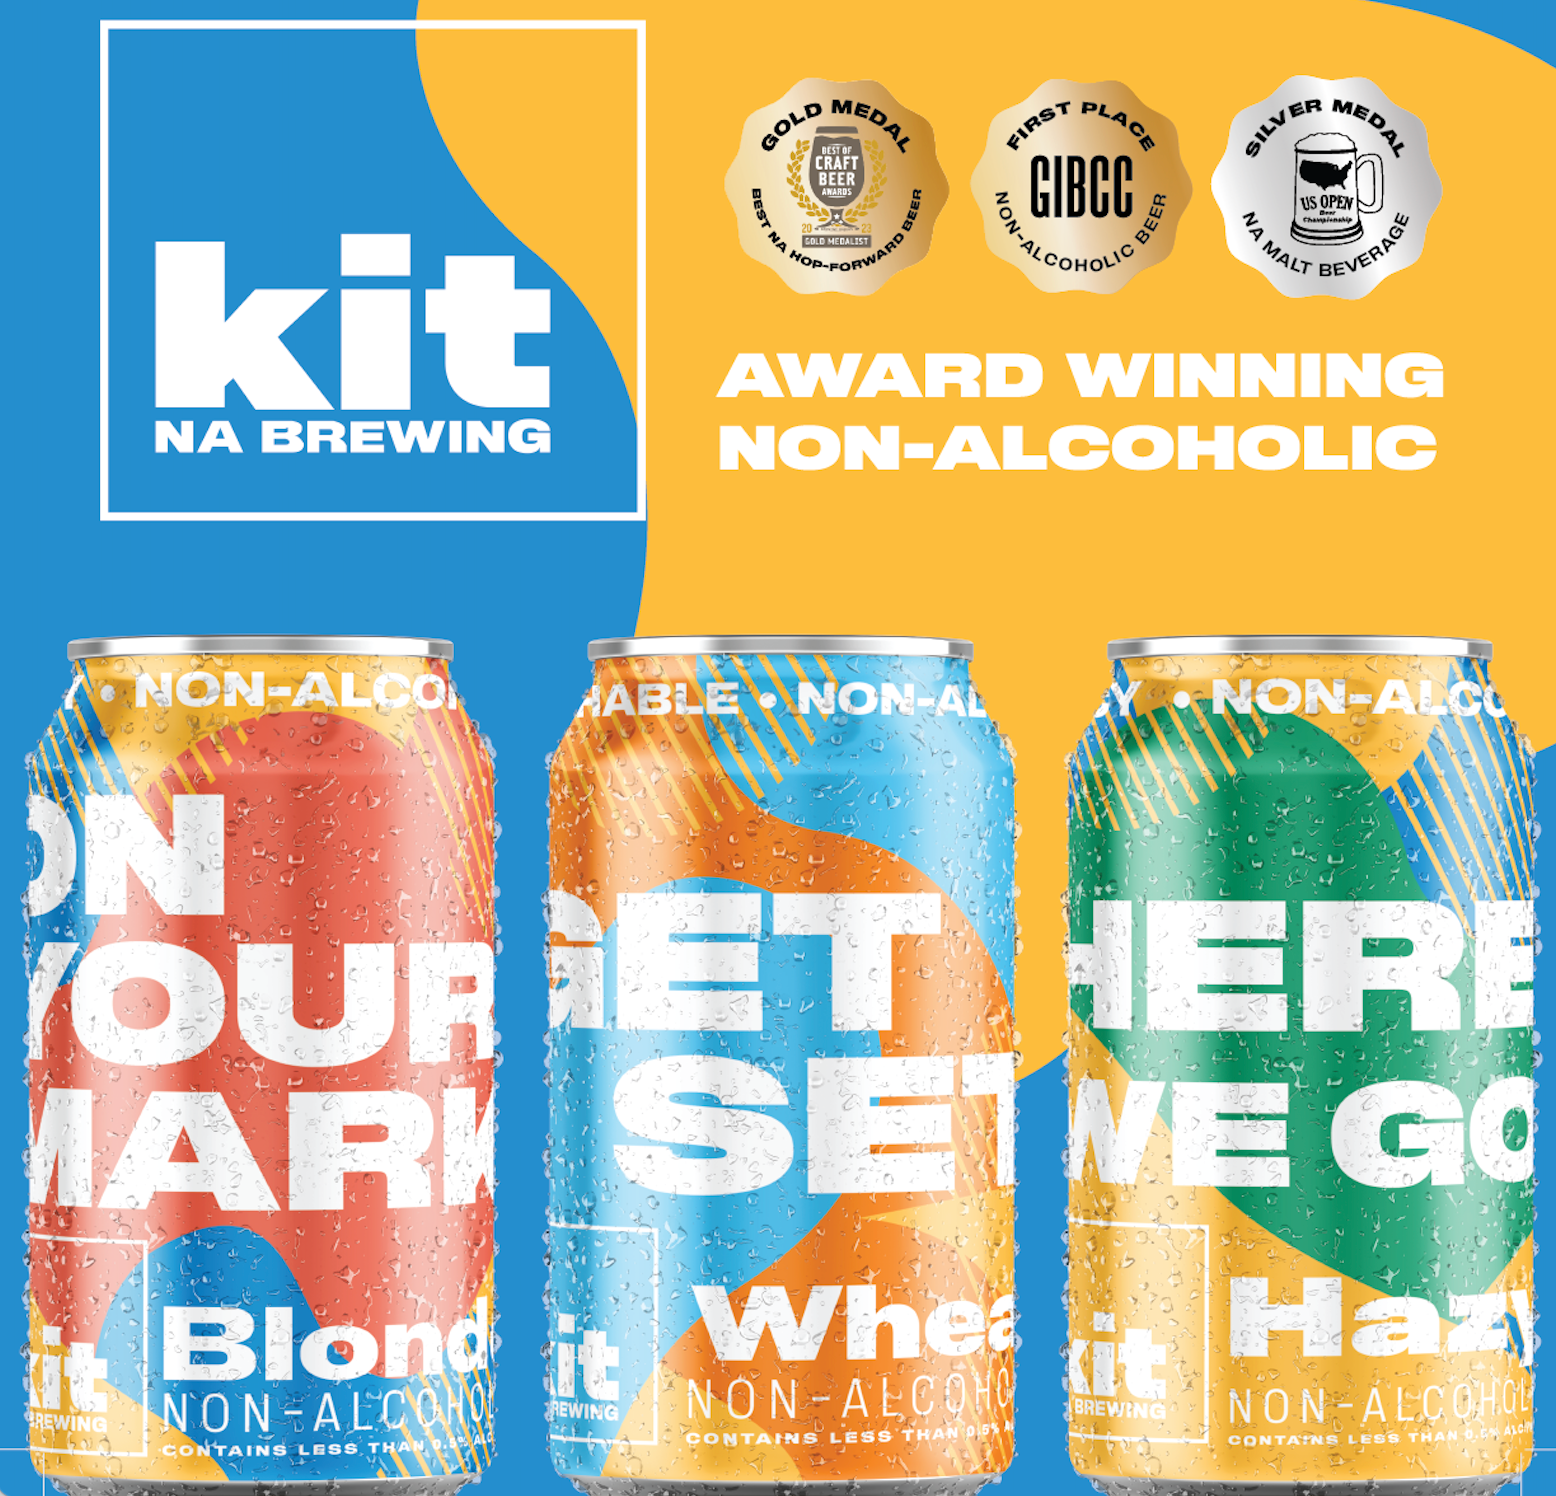 Kit NA Brewing Expands Footprint: Secures Wegmans and Grows East Coast Presence